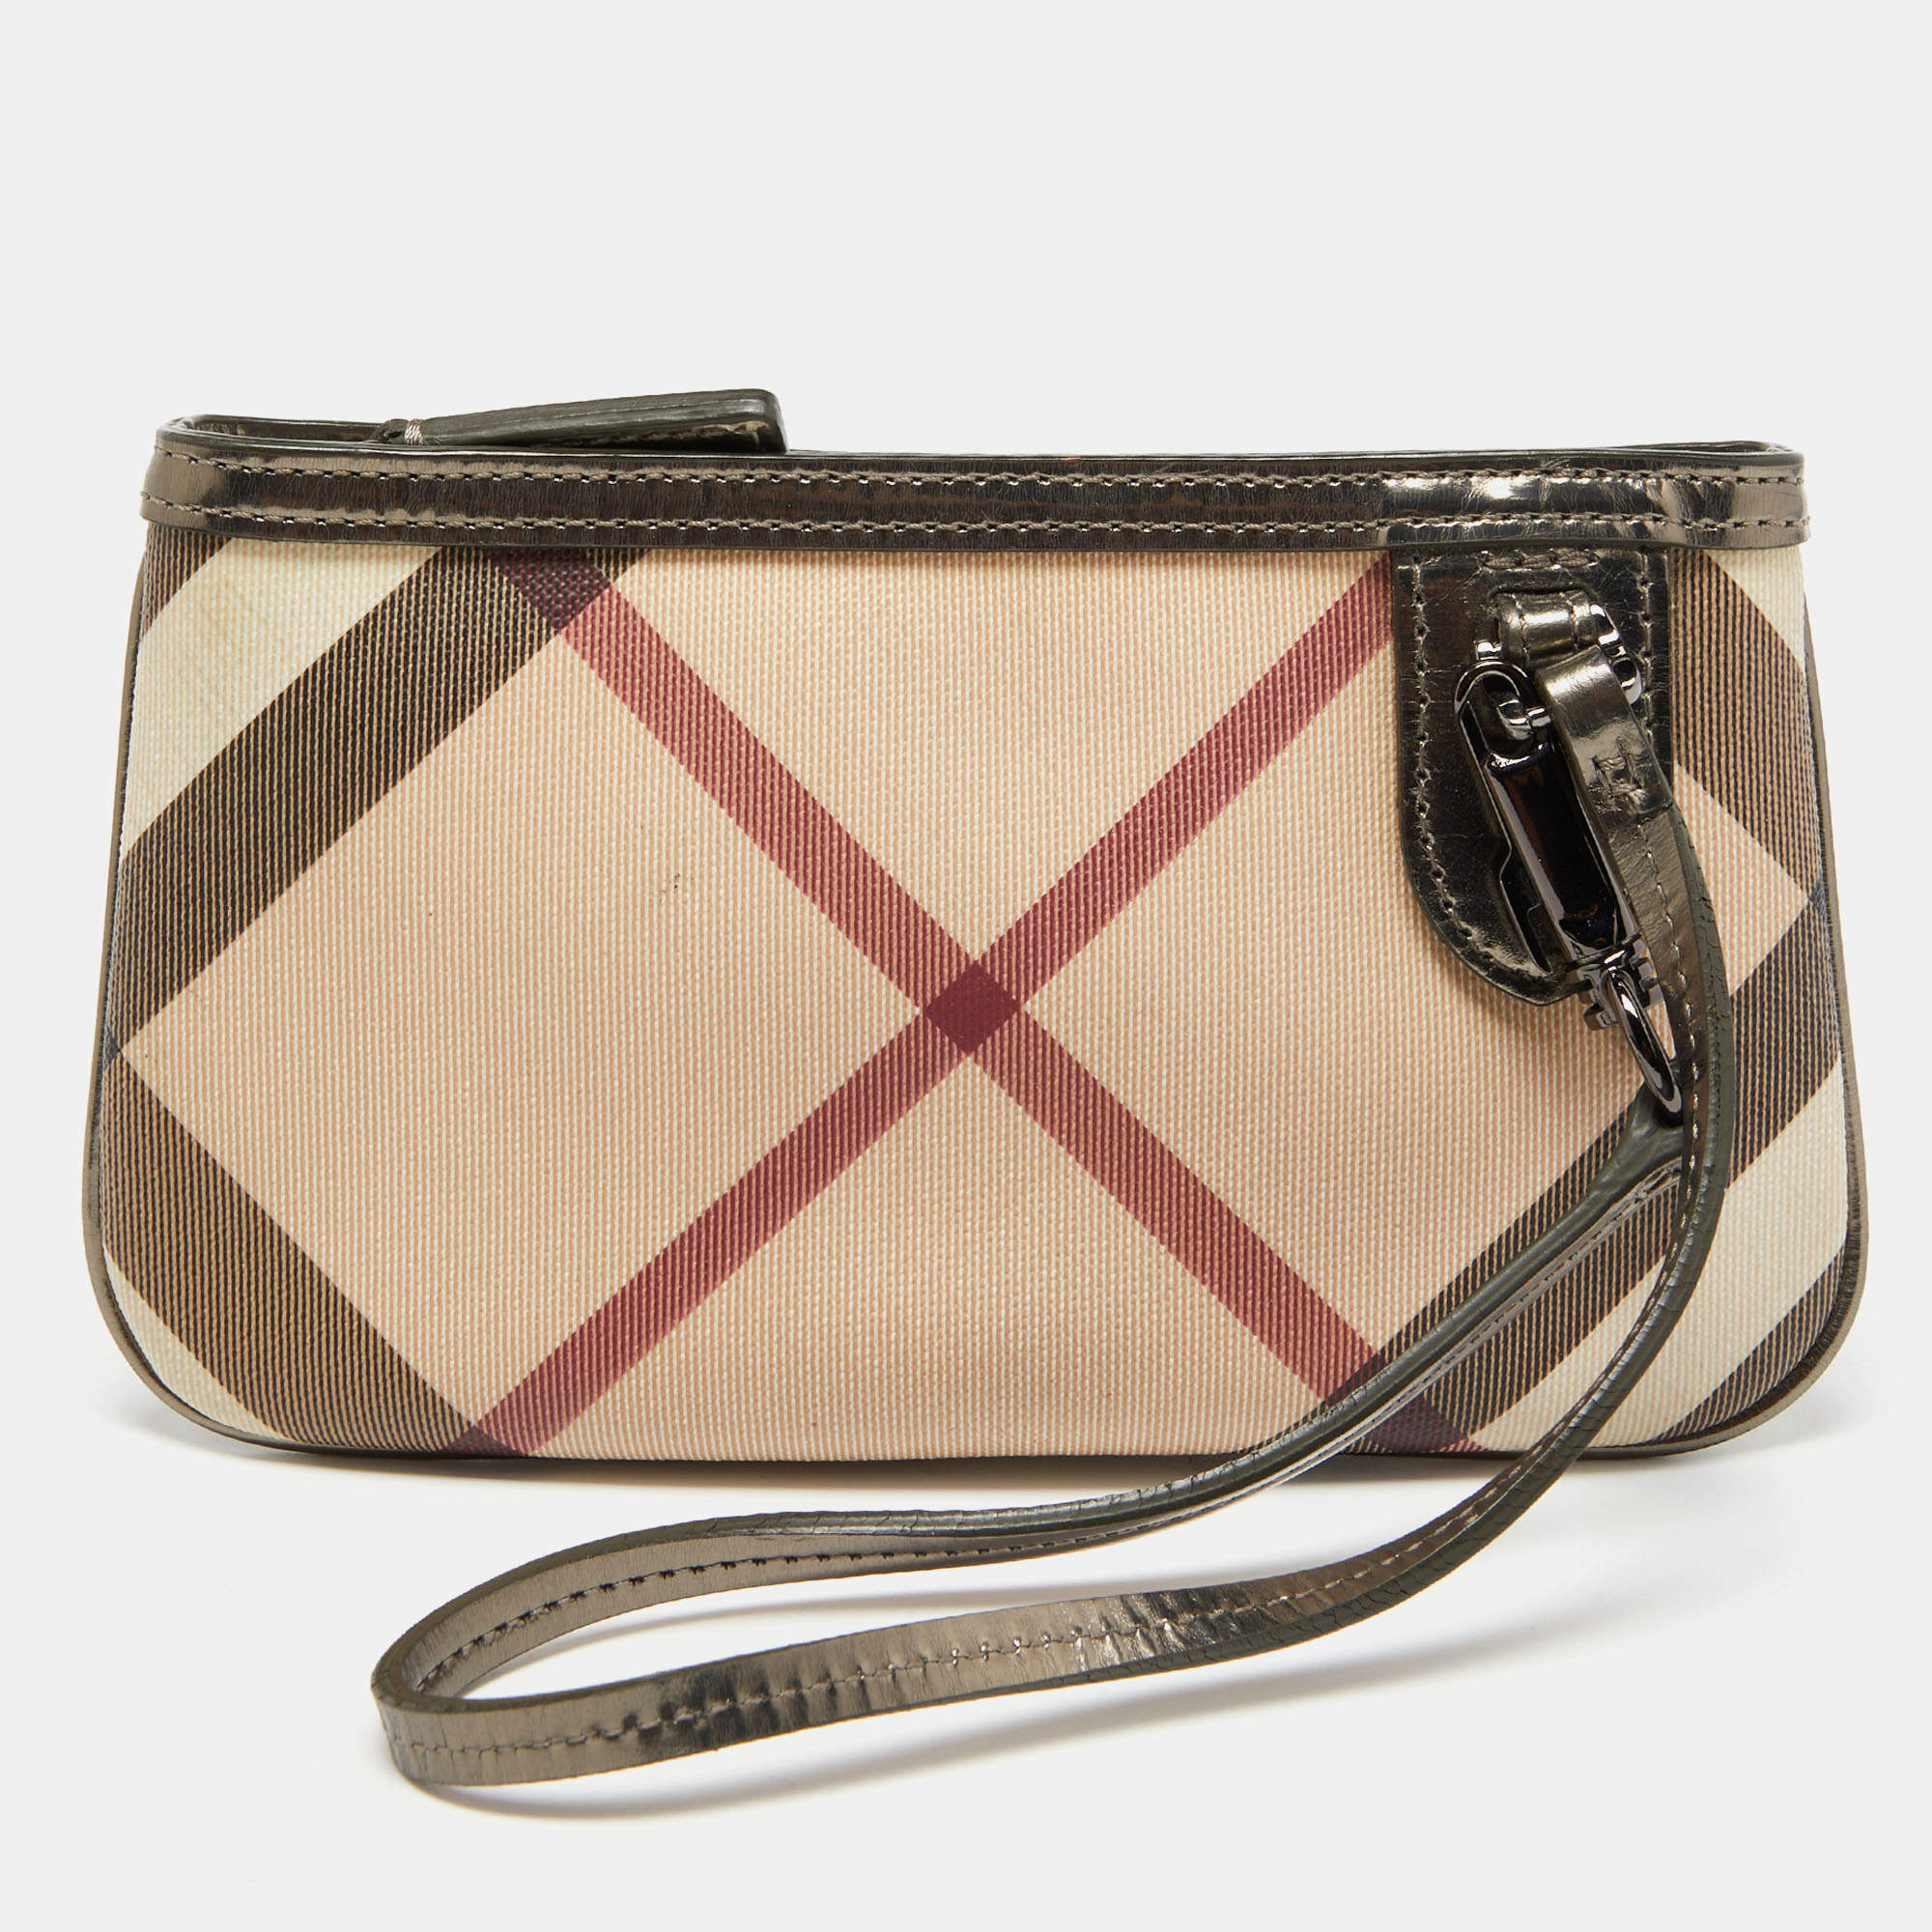 Burberry Metallic/Beige Nova Check PVC and Patent Leather French